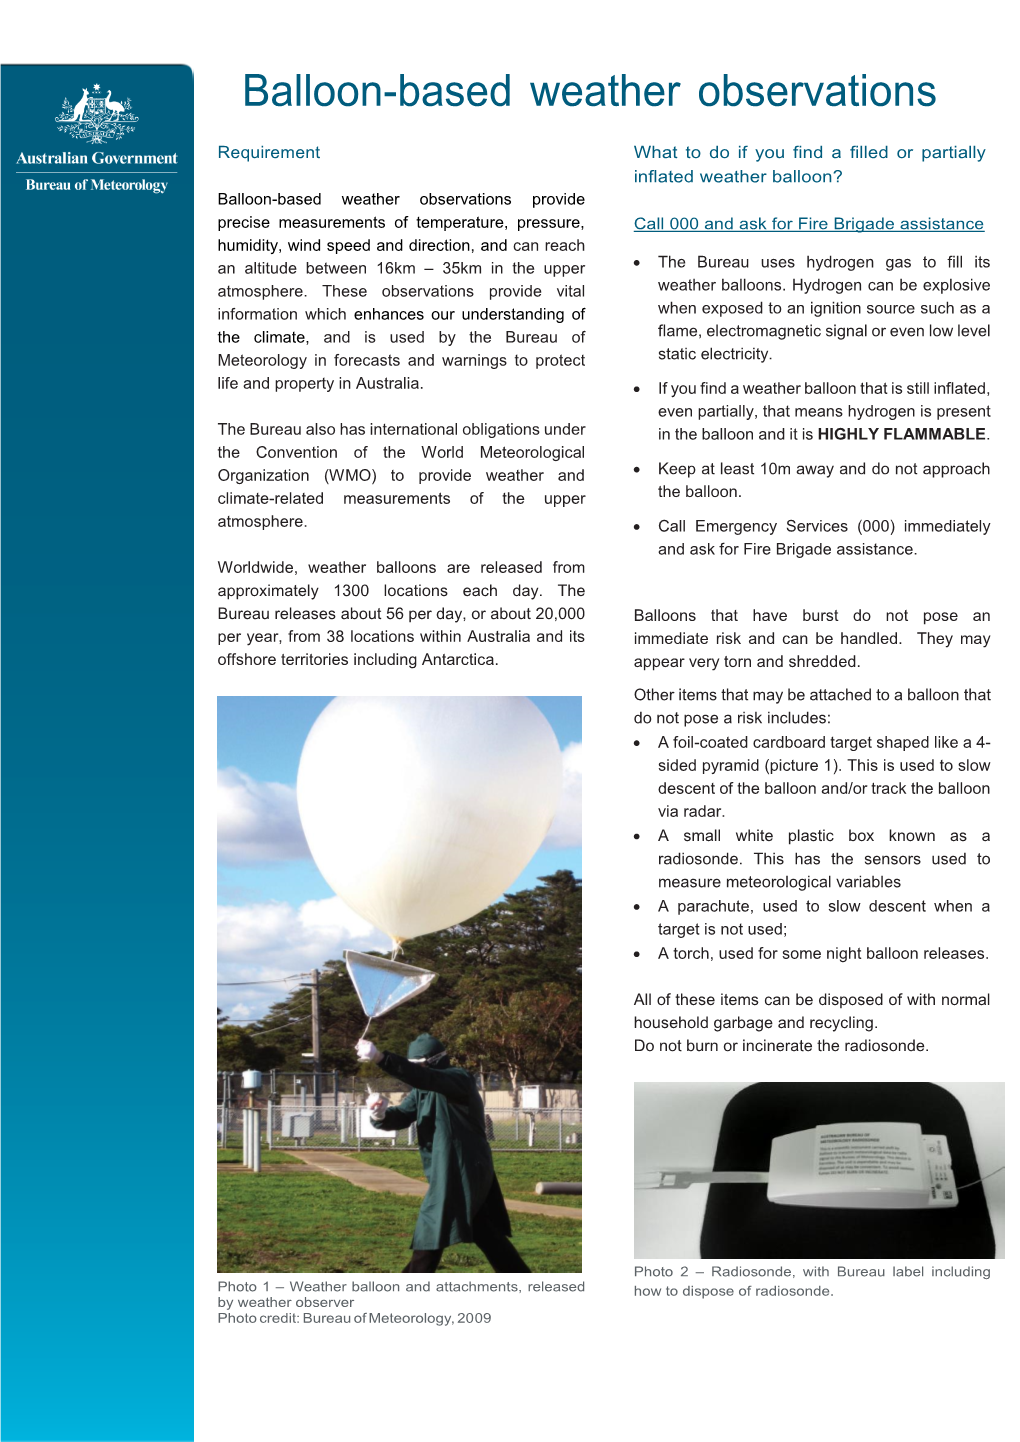 Balloon-Based Weather Observations